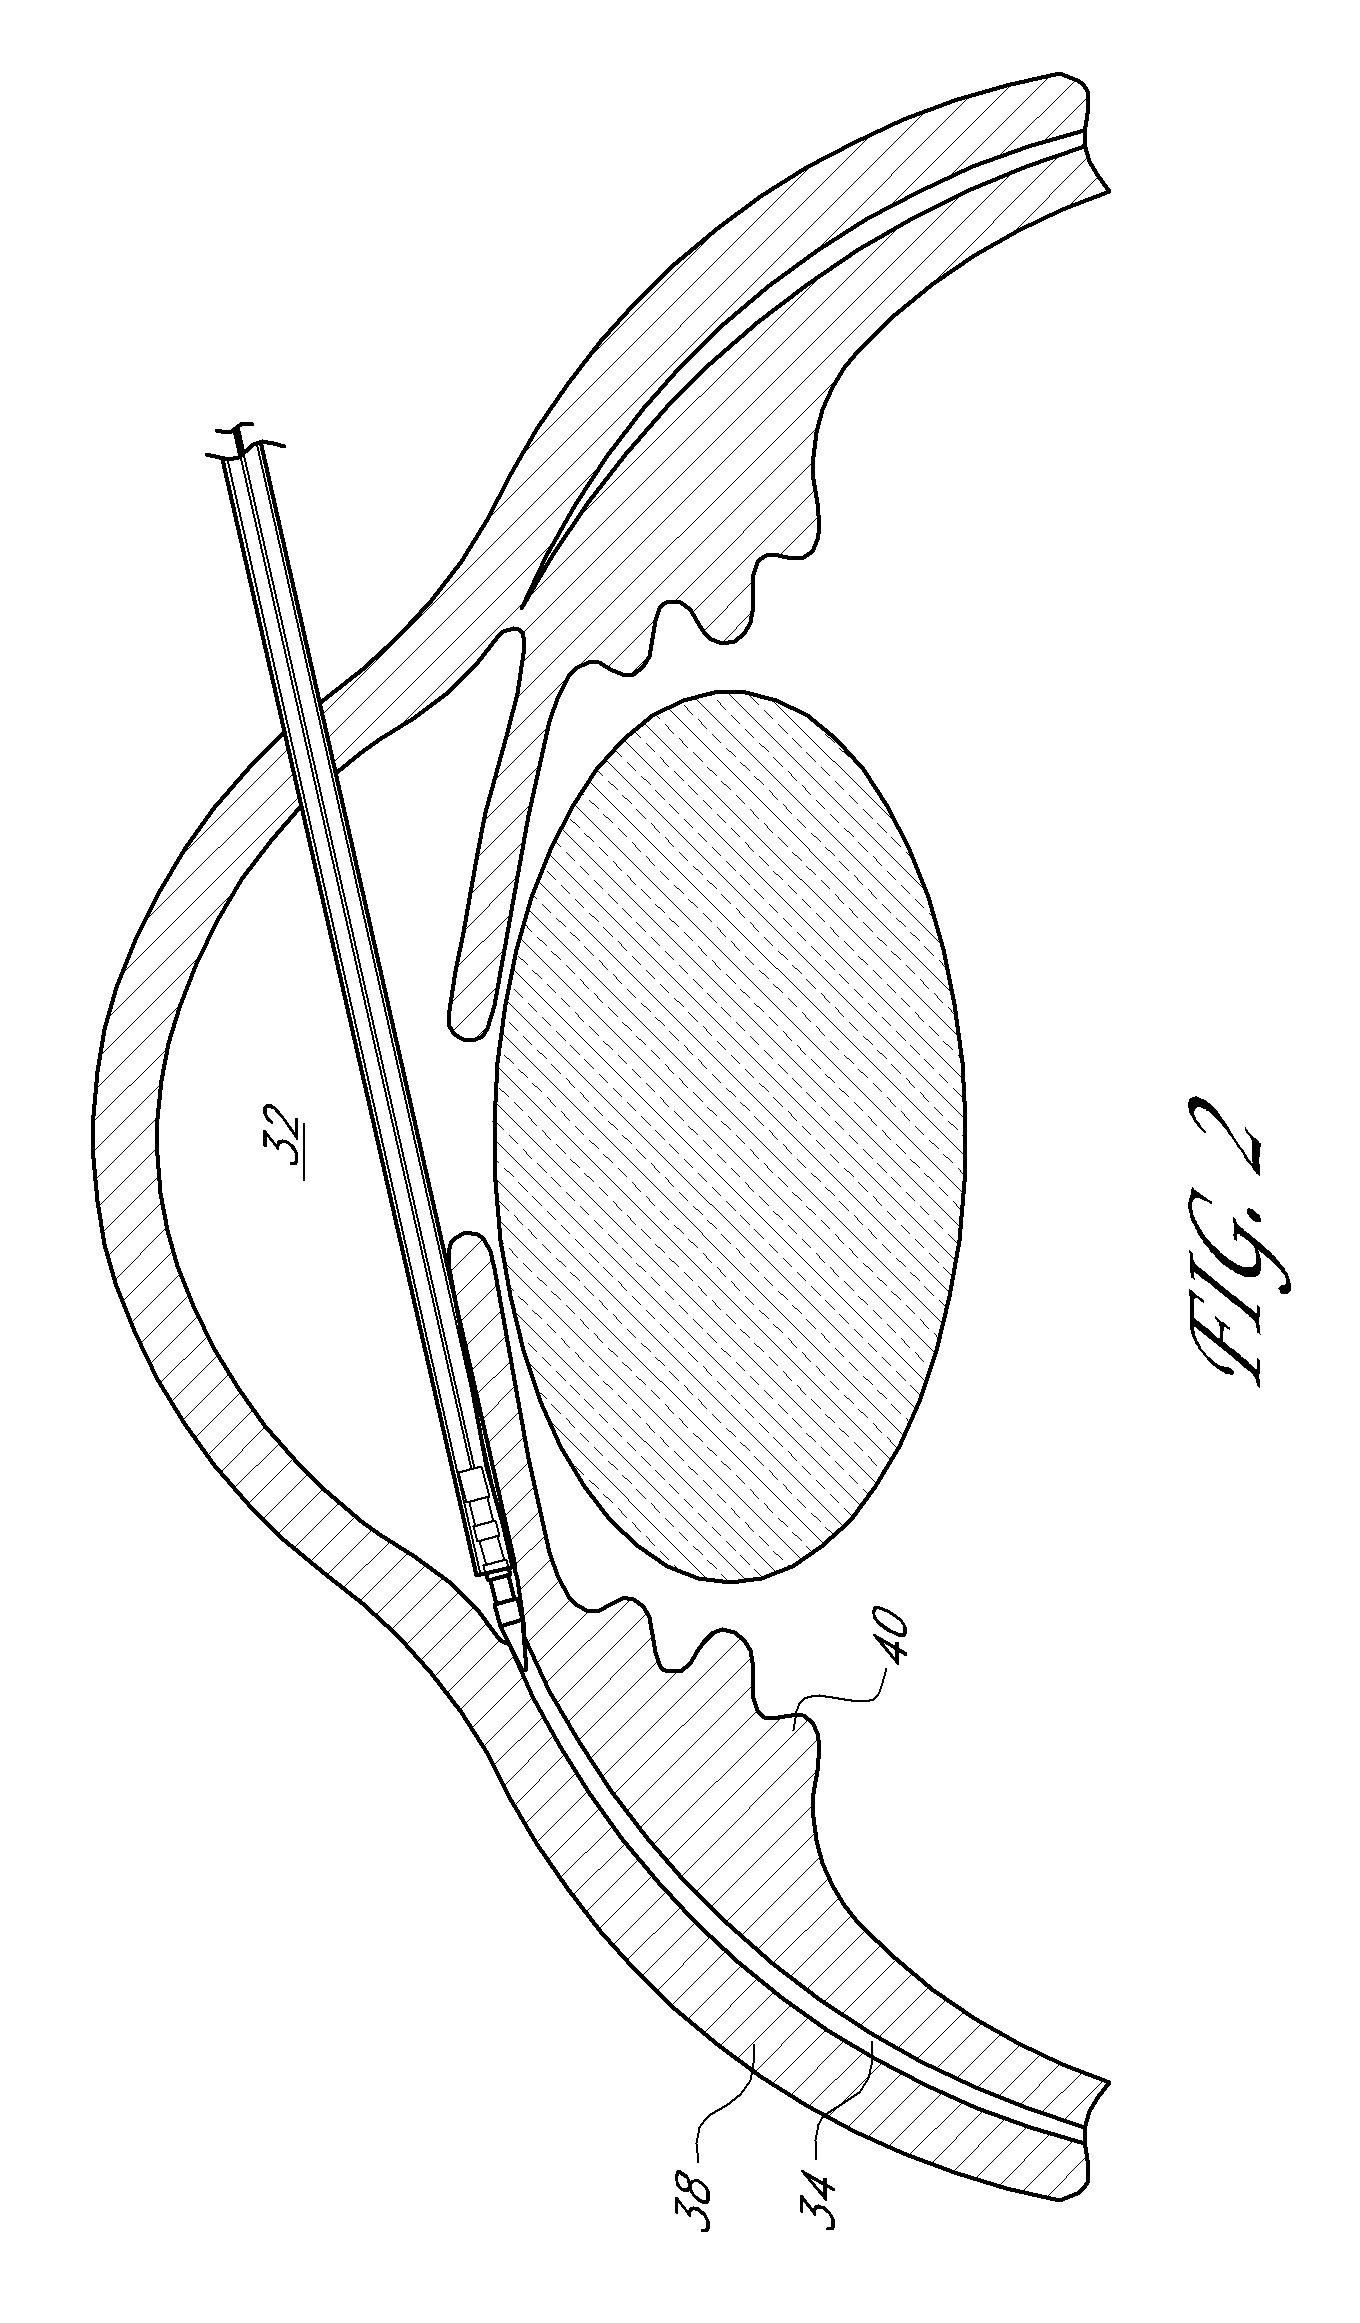 Uveoscleral shunt and methods for implanting same